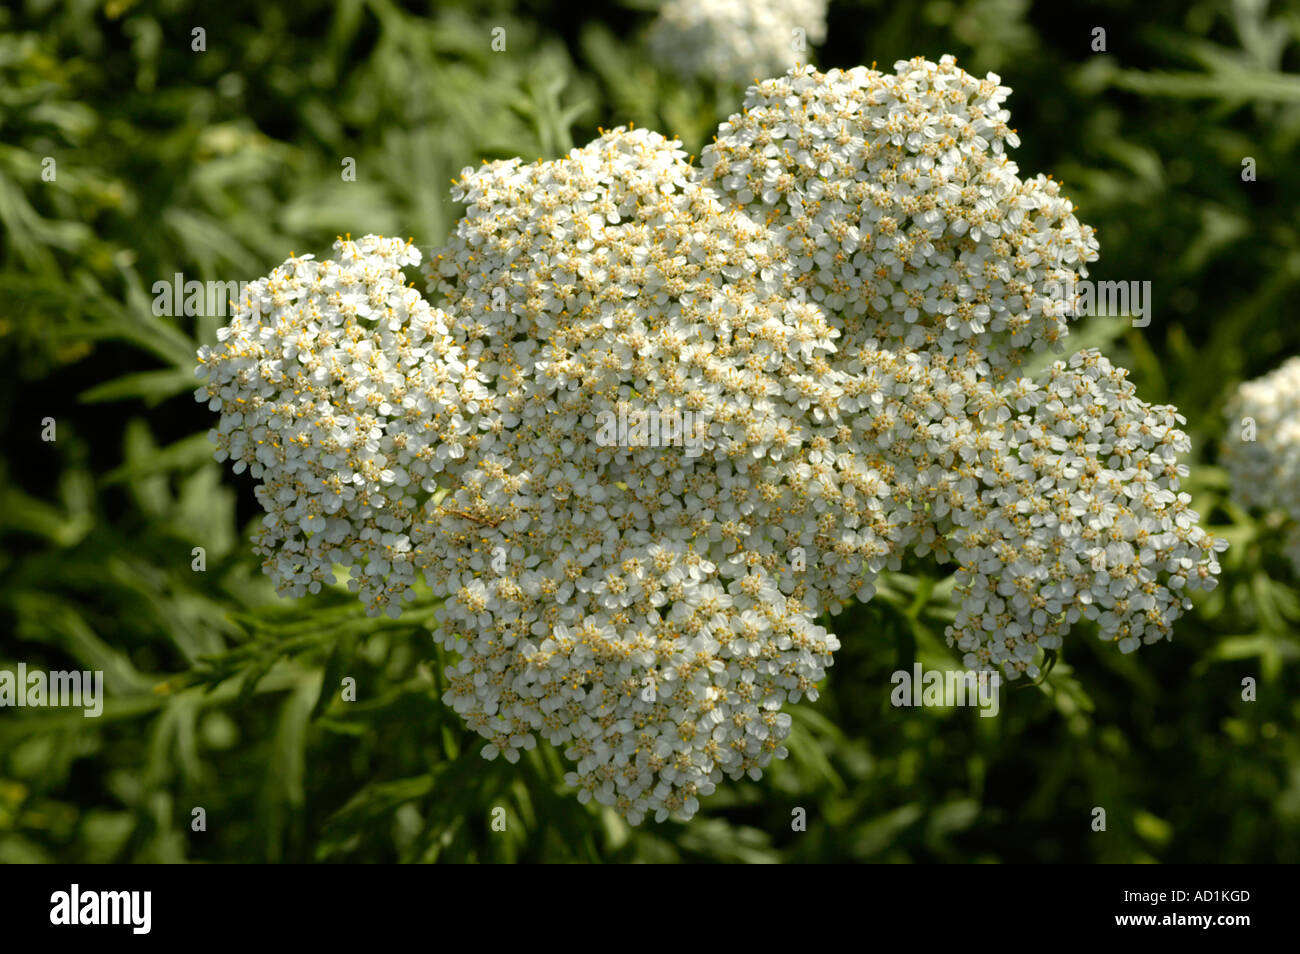 White flowers Compositae Achillea x obscura Nees or A macrophylla or A moschata Europe Stock Photo